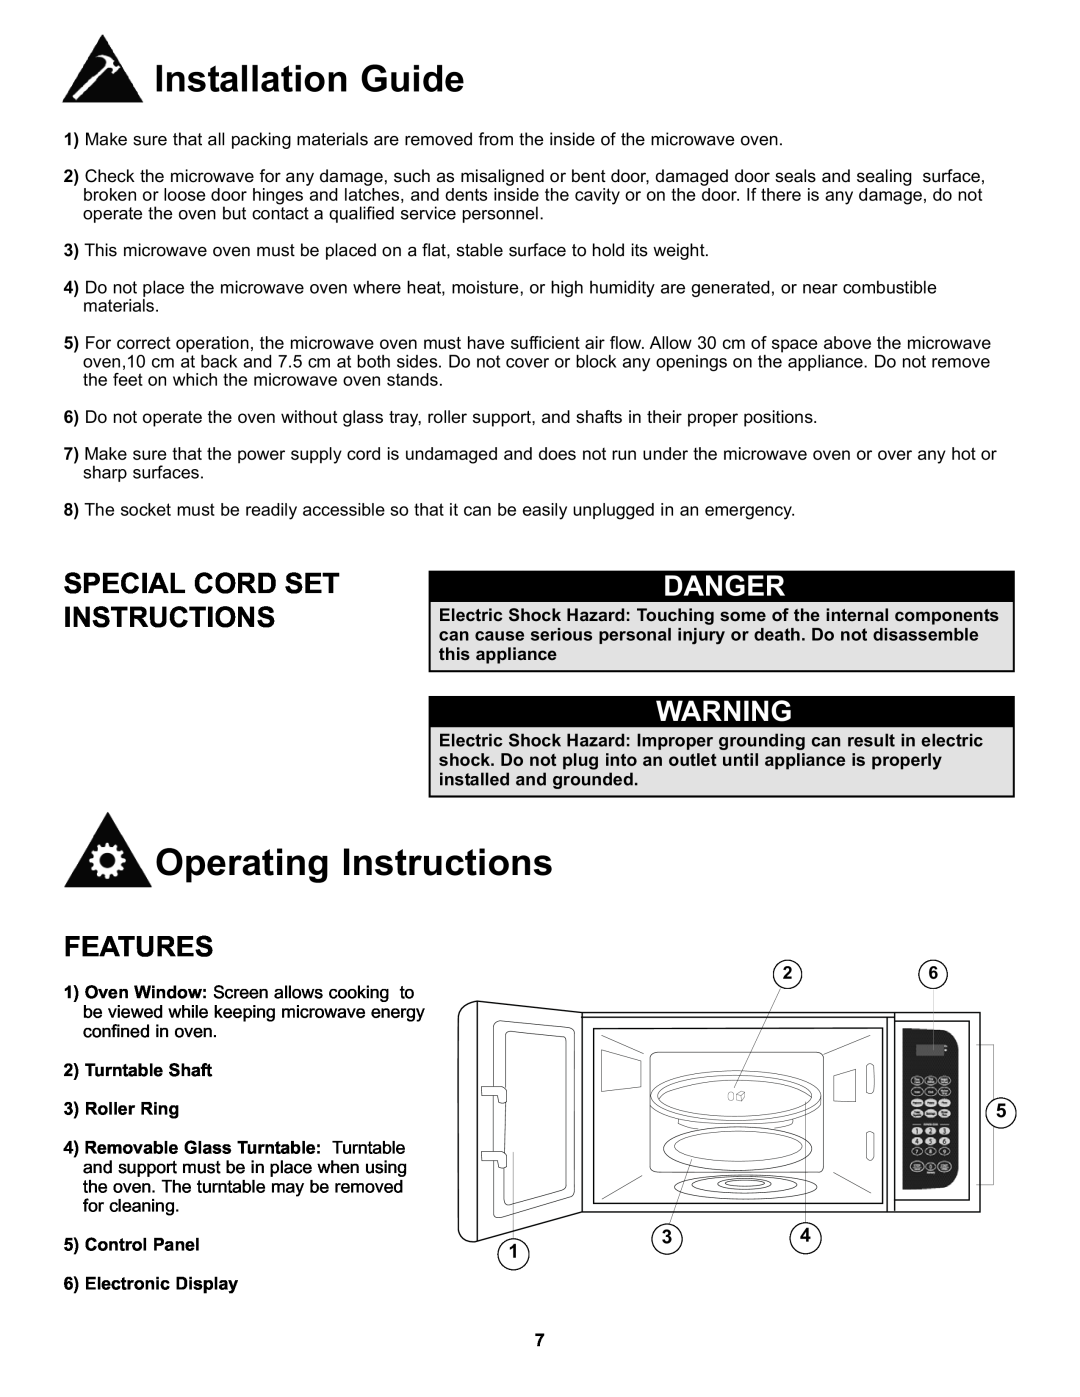 Danby DMW7700BLDB, DMW7700WDB Installation Guide, Operating Instructions, Special Cord Set Instructions, Danger, Features 